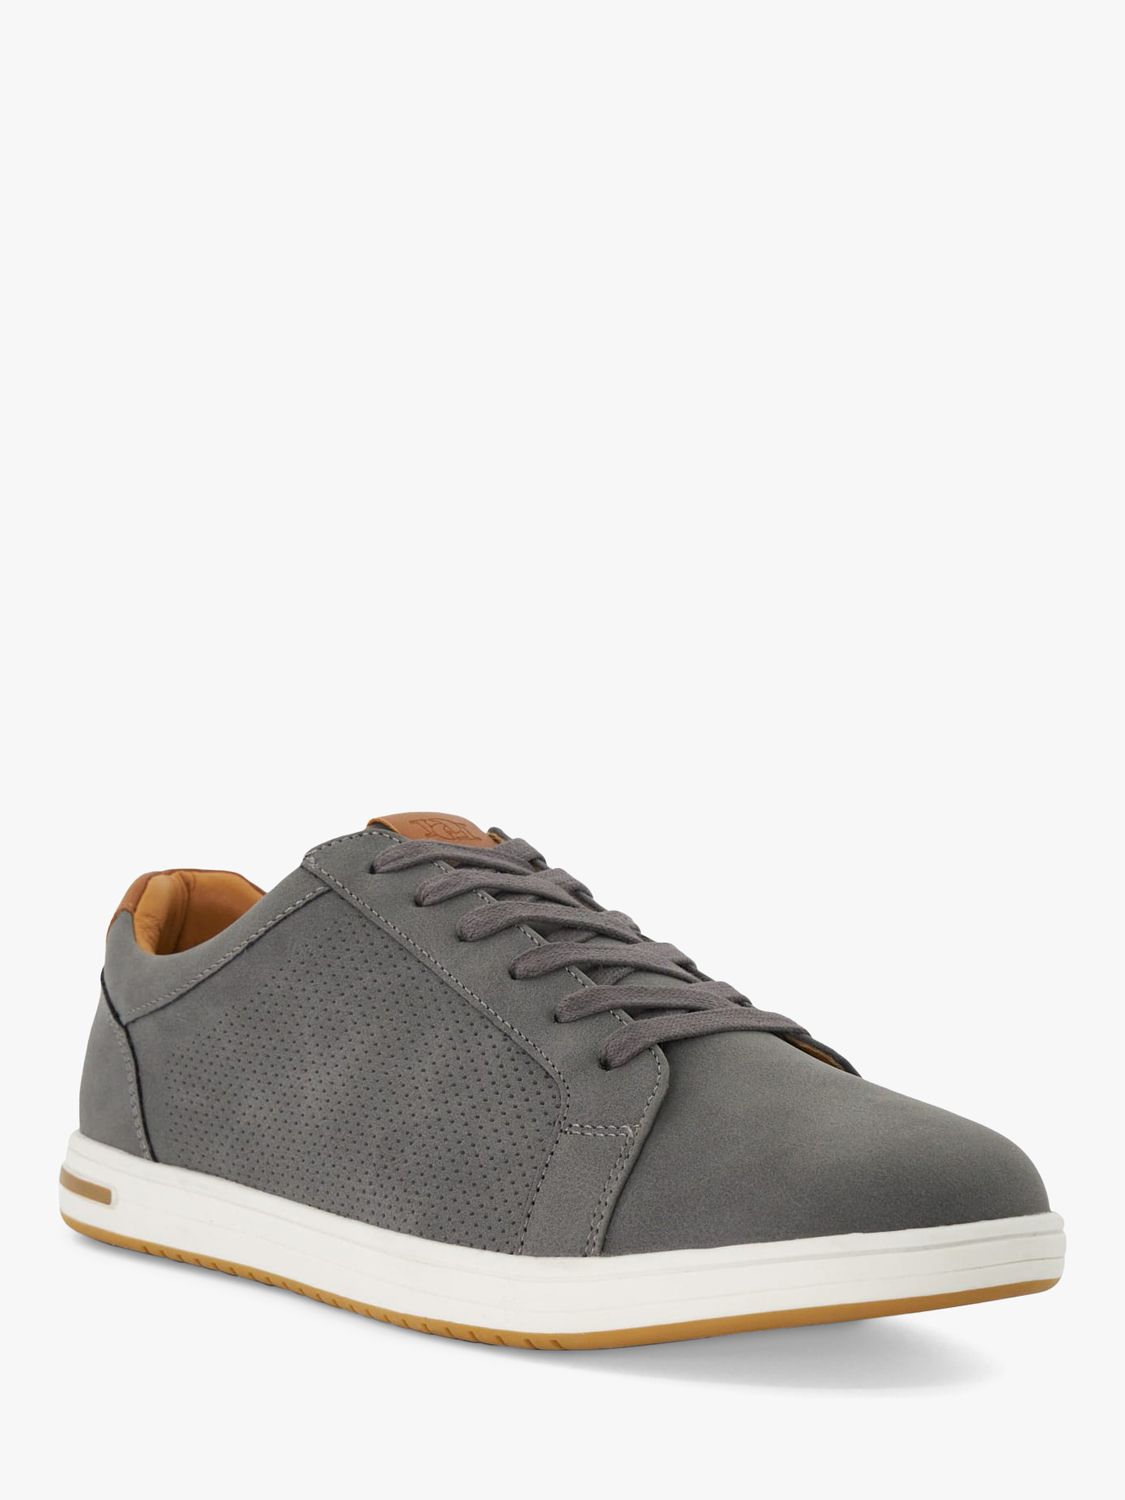 Dune Wide Fit Tezzy Suedette Lace Up Trainers, Grey, 6